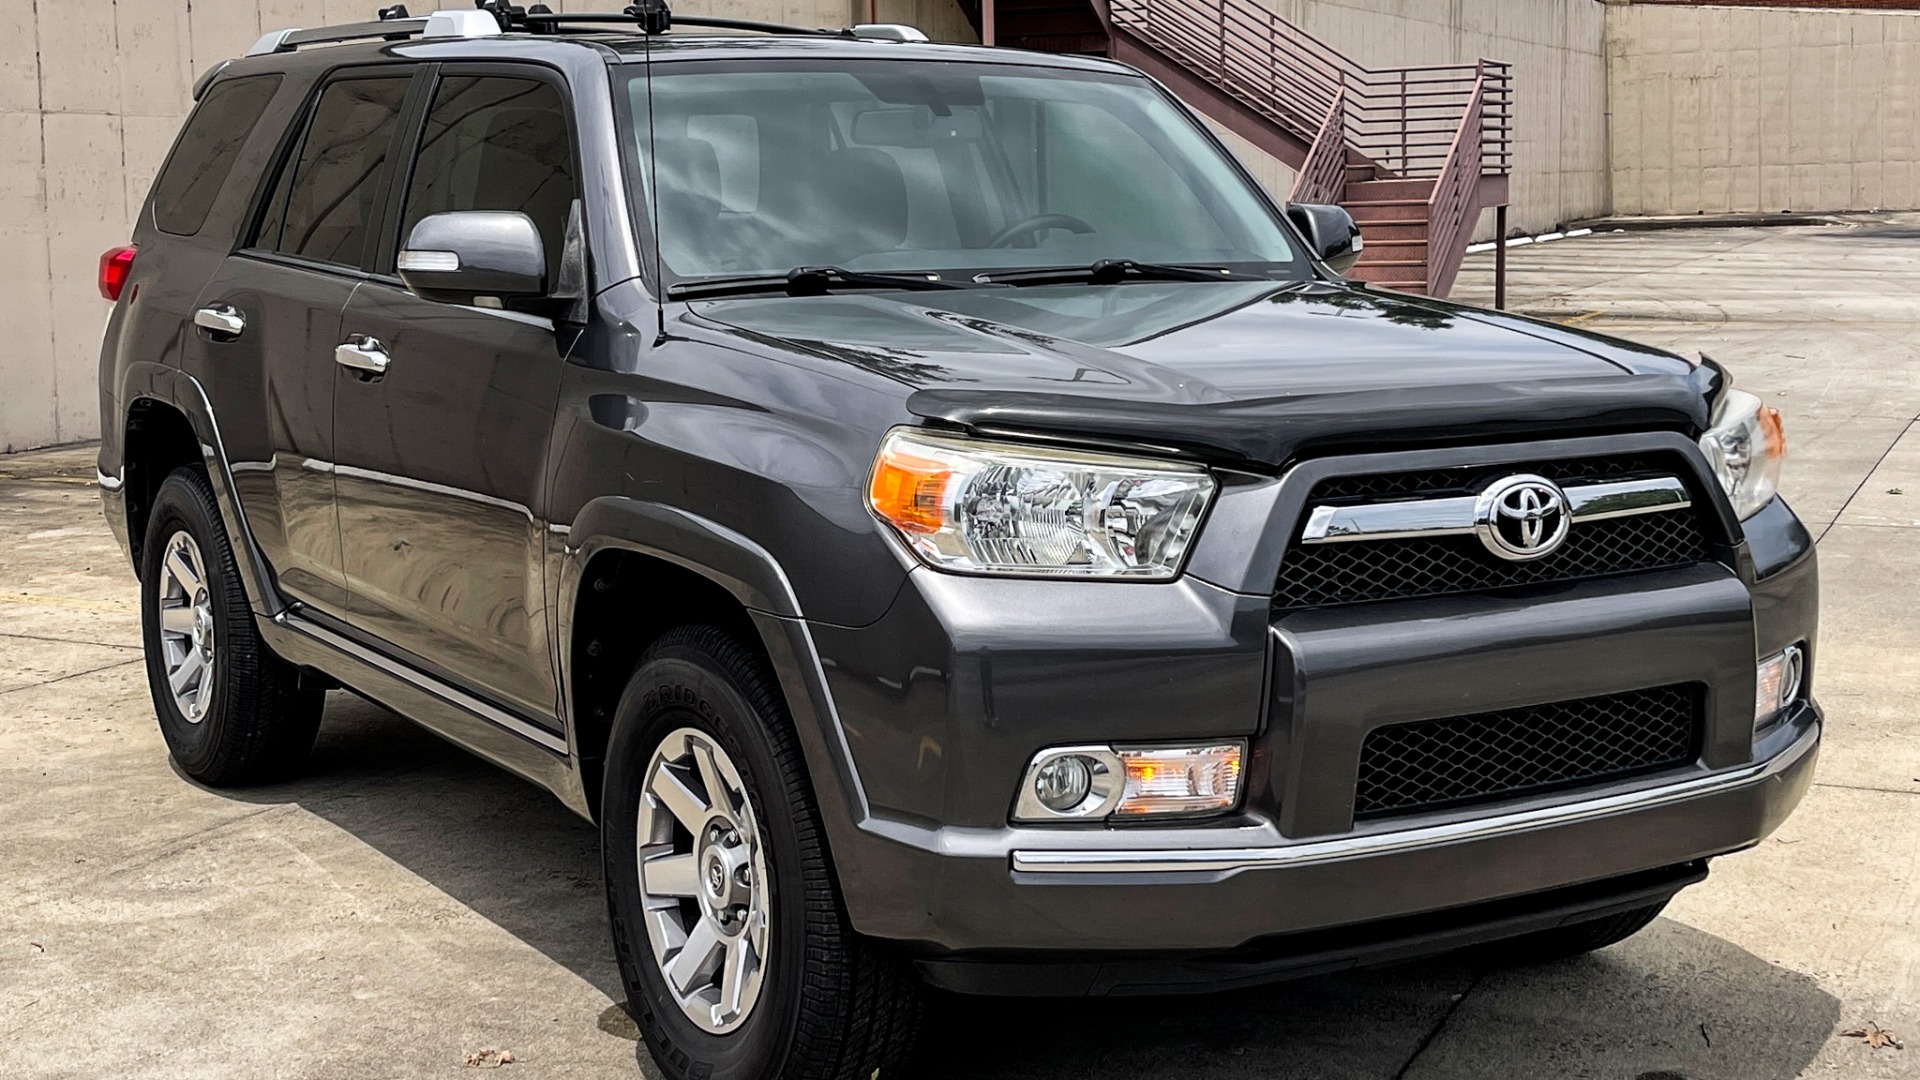 Used 2011 Toyota 4Runner SR5 / SUNROOF / 4X4 / BLUETOOTH / BACKUP CAMERA for sale $19,900 at Formula Imports in Charlotte NC 28227 5